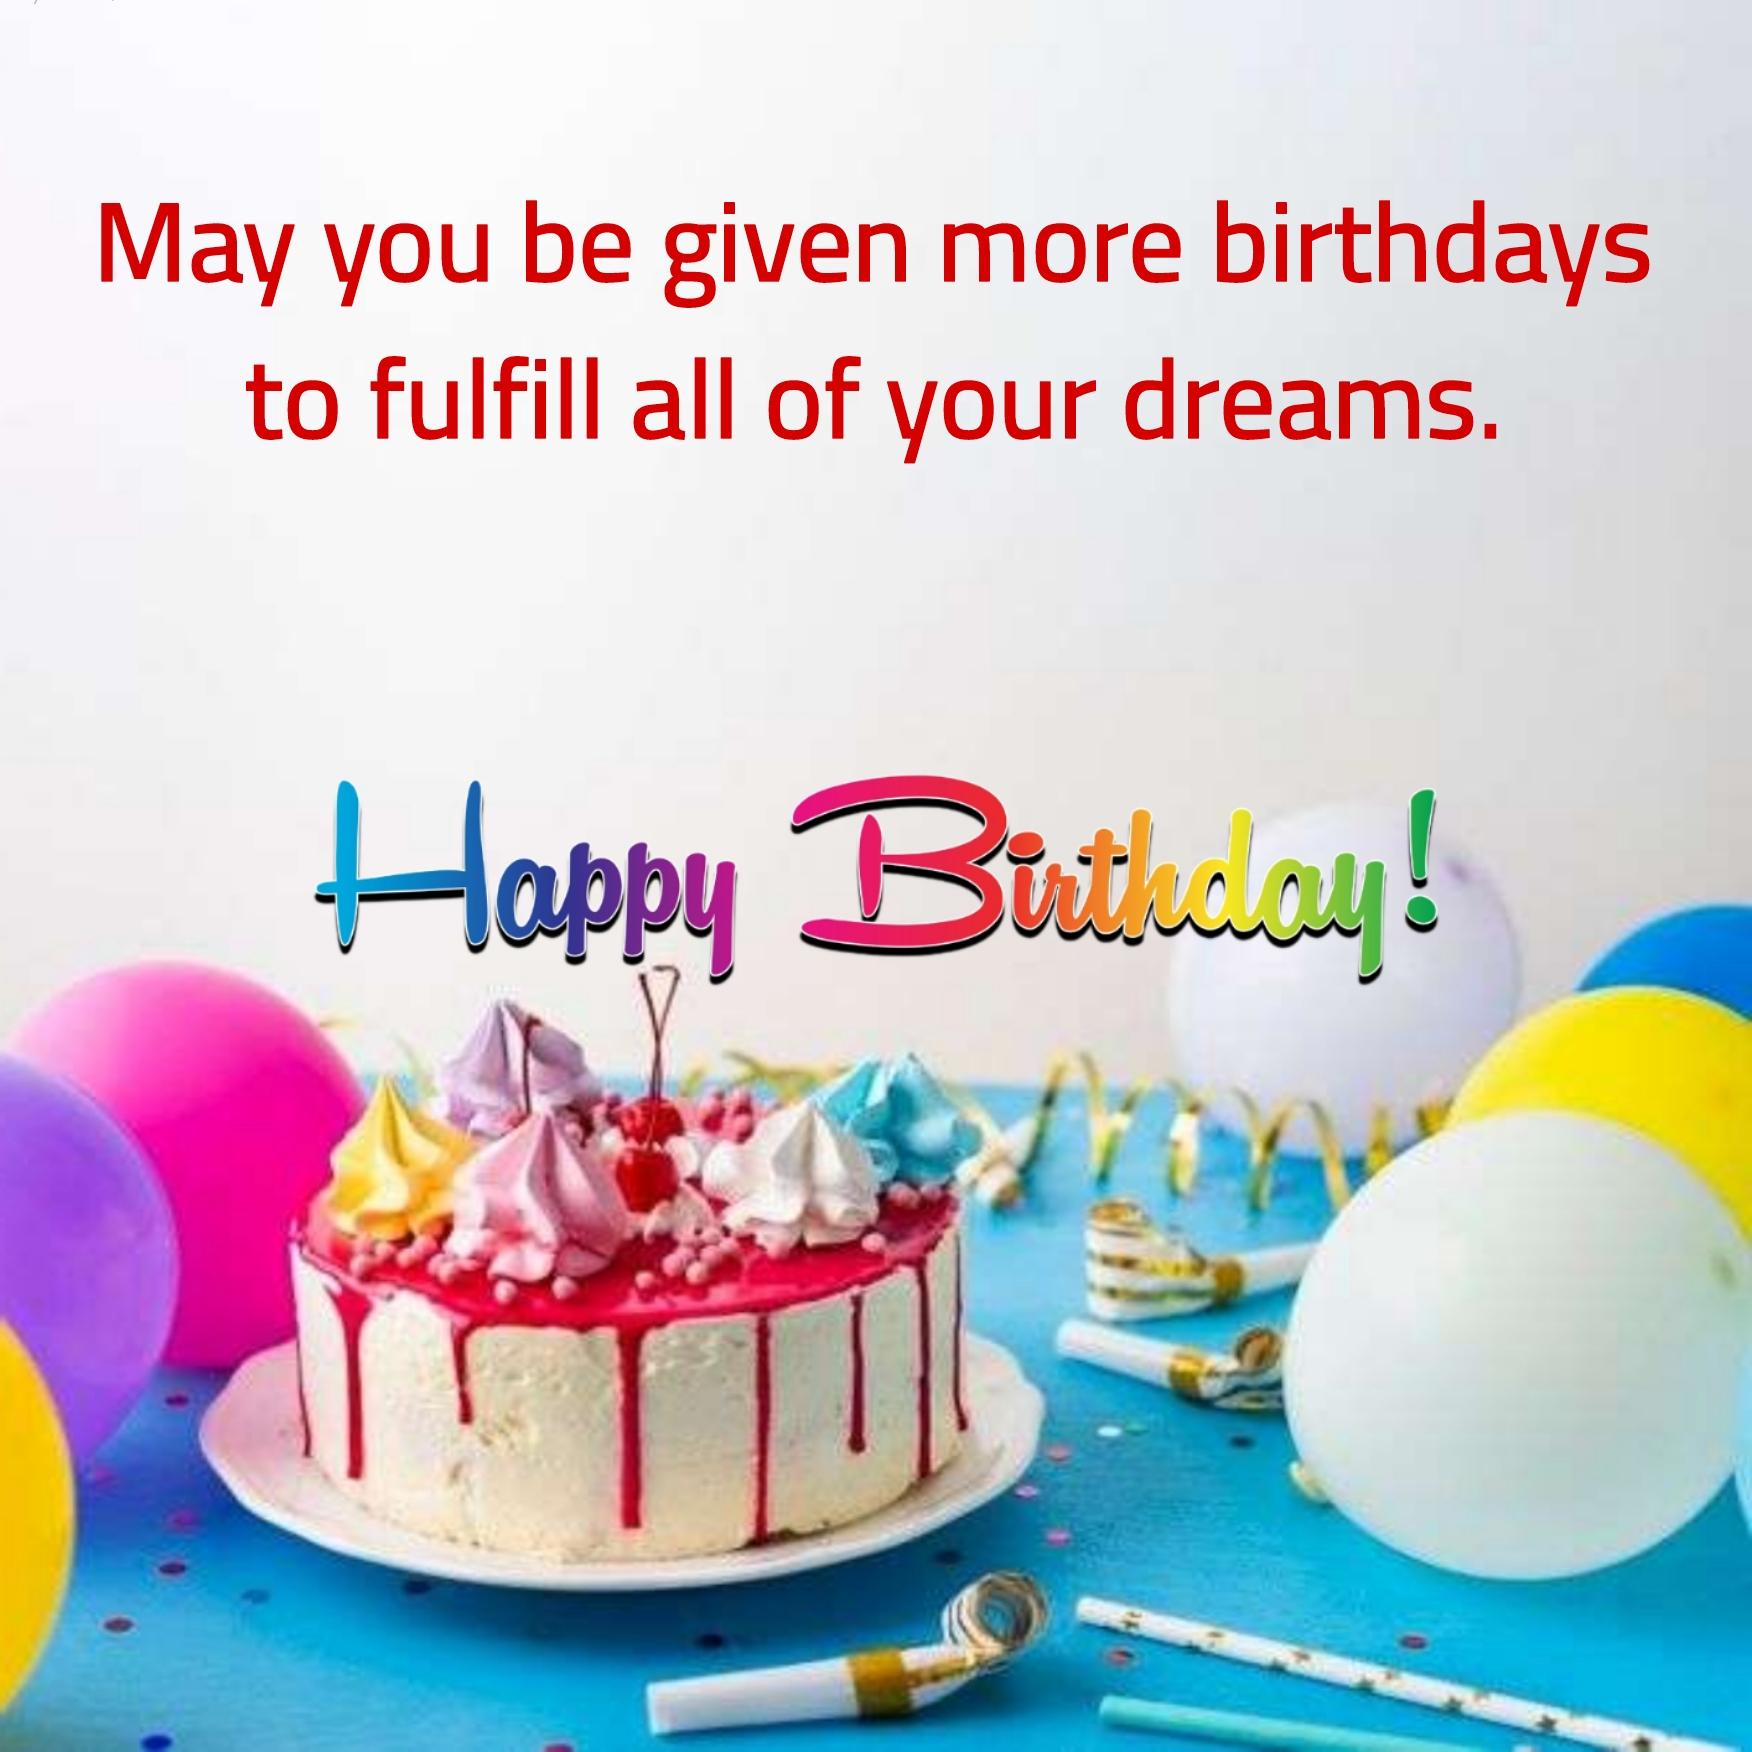 May you be given more birthdays to fulfill all of your dreams